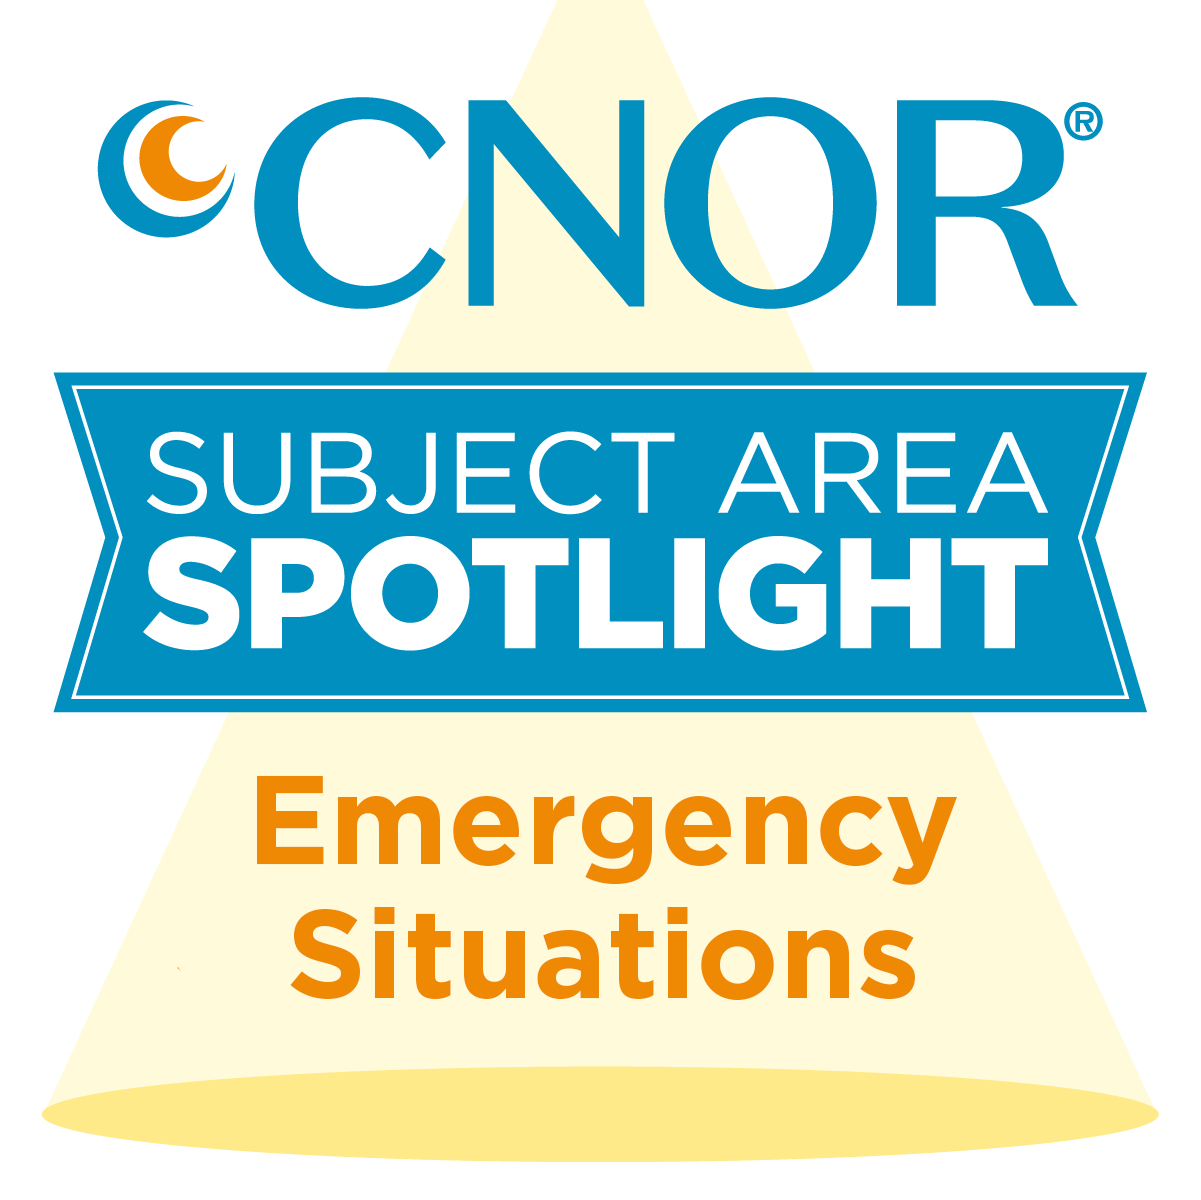 CNOR Subject Area Spotlight: Emergency Situations